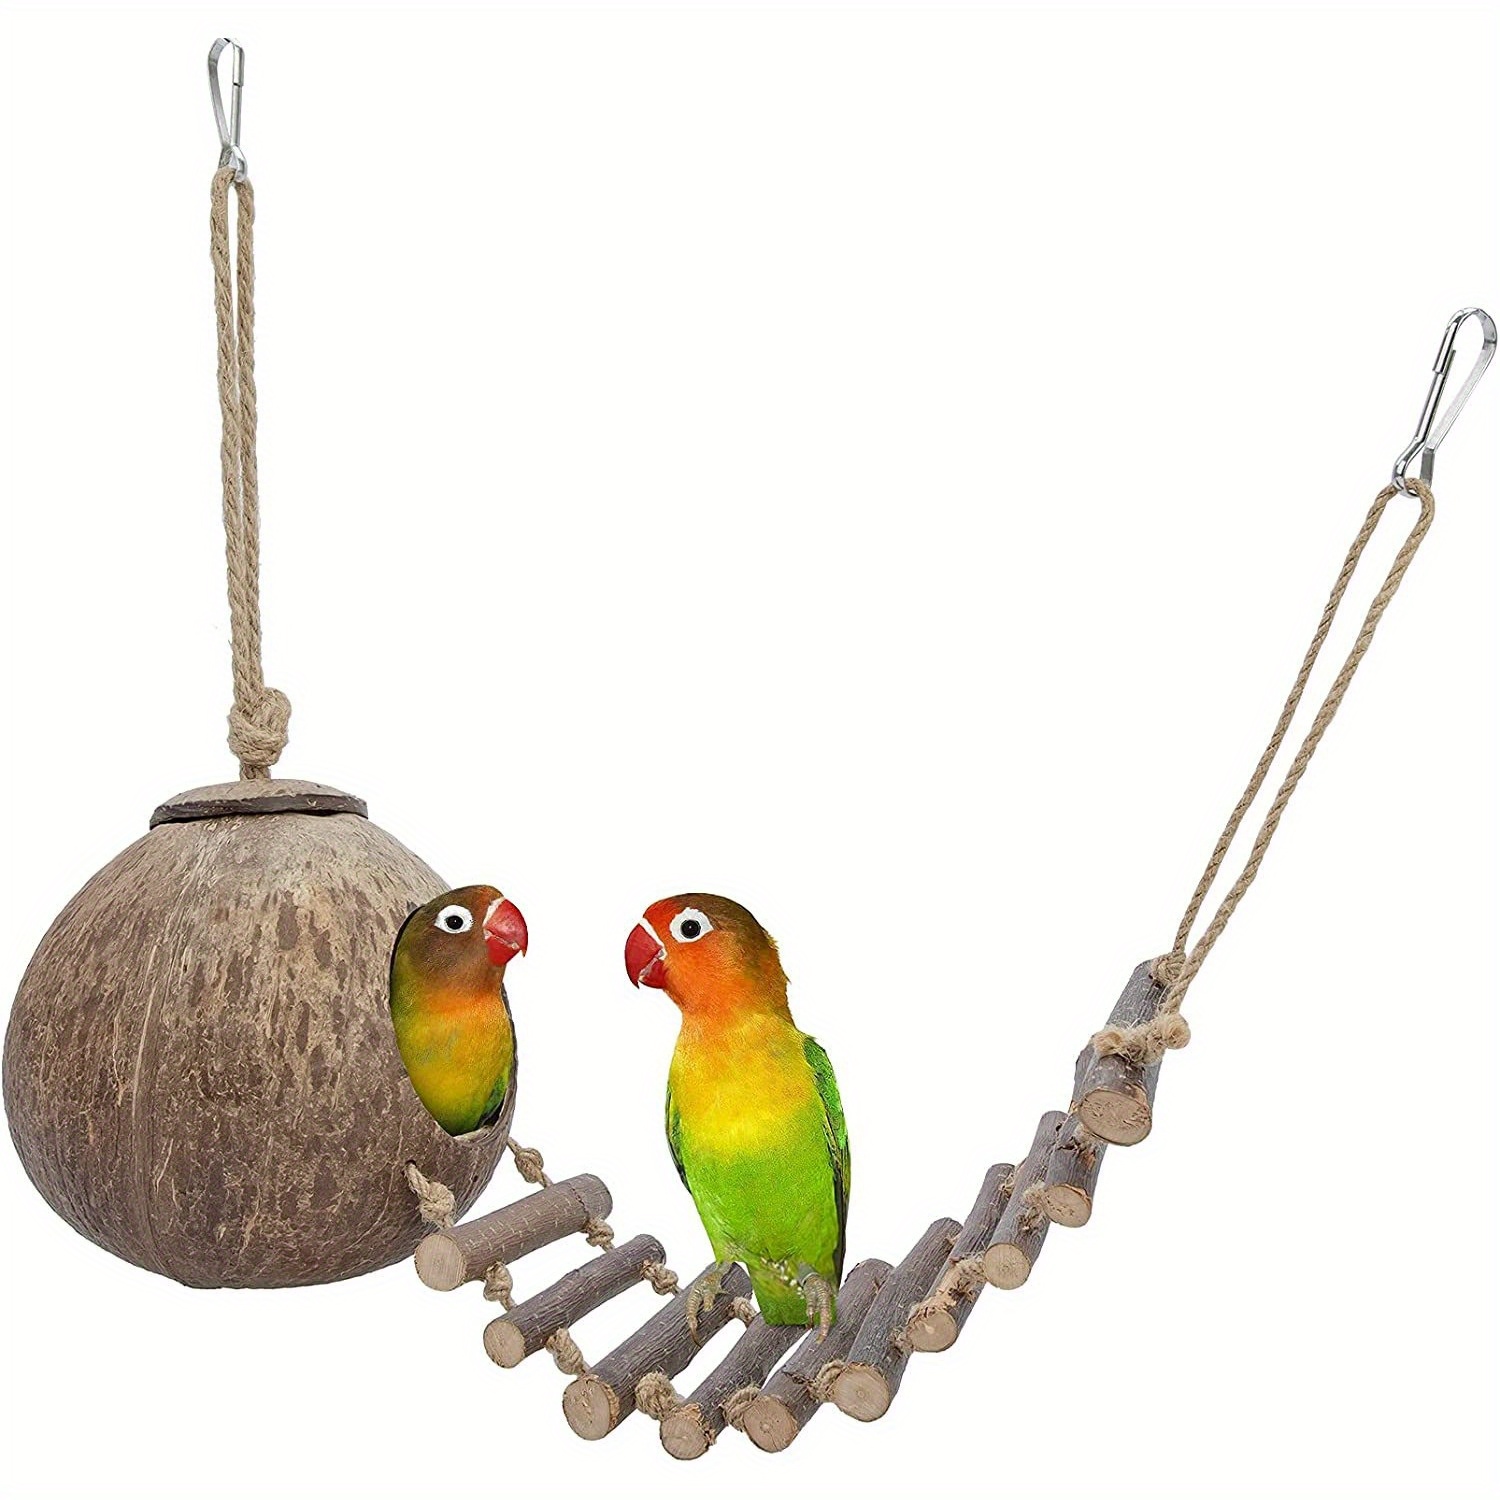 Bird Cages, Grass Bird Huts, Hanging Bird Houses, and Nesting Perches for  Your Feathered pets